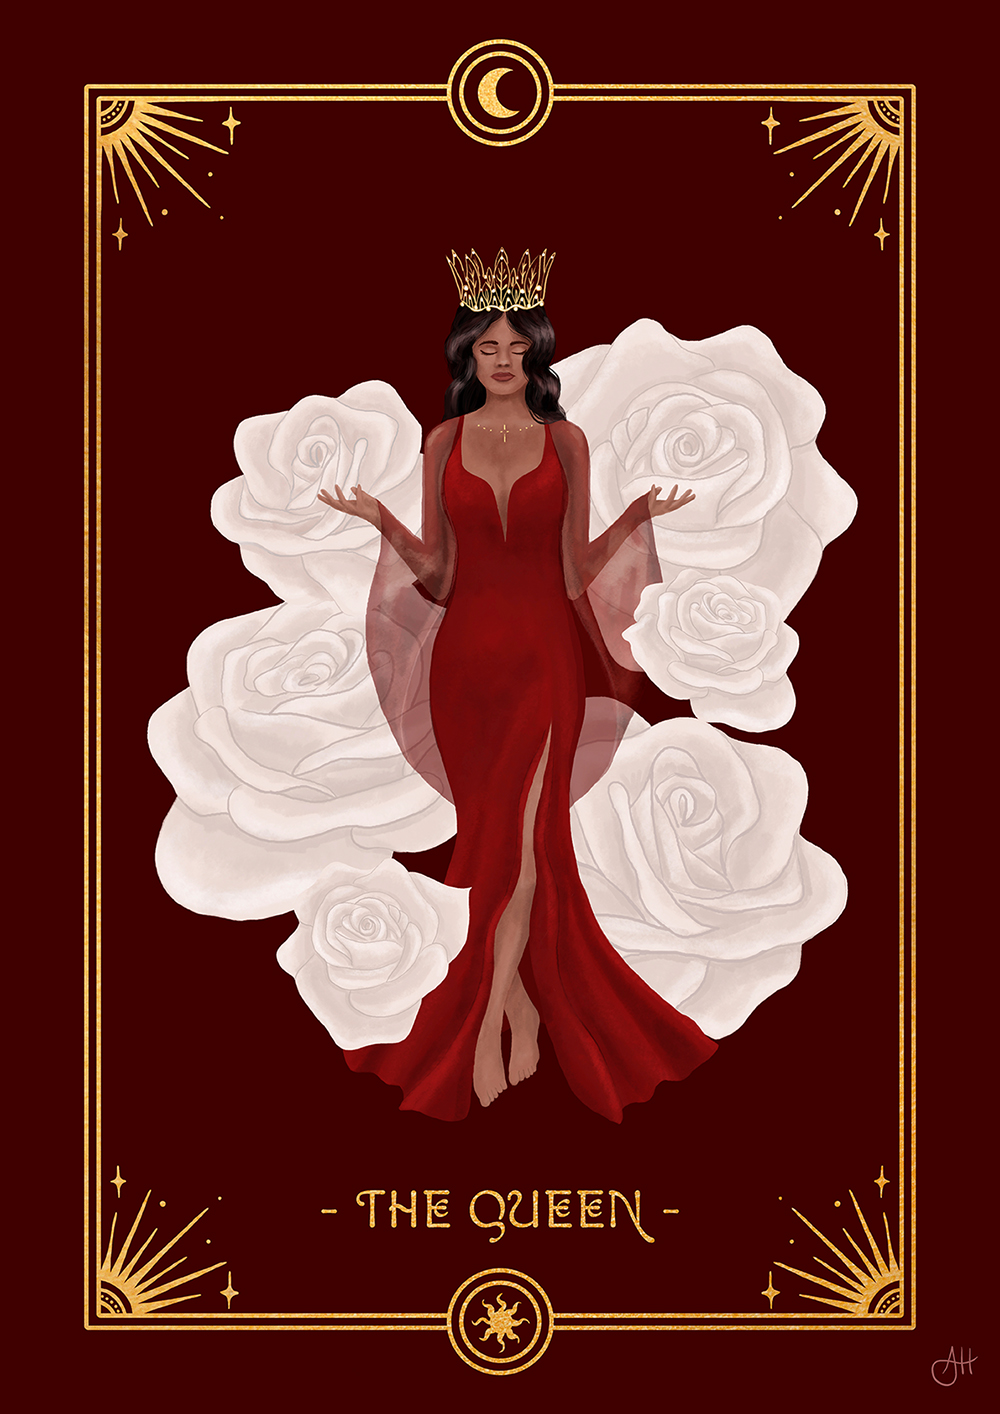 Illustrations of the 7 Feminine Archetypes by Anna Heimkreiter. "The Queen" shows a majestic woman with a crown surrounded by white roses.